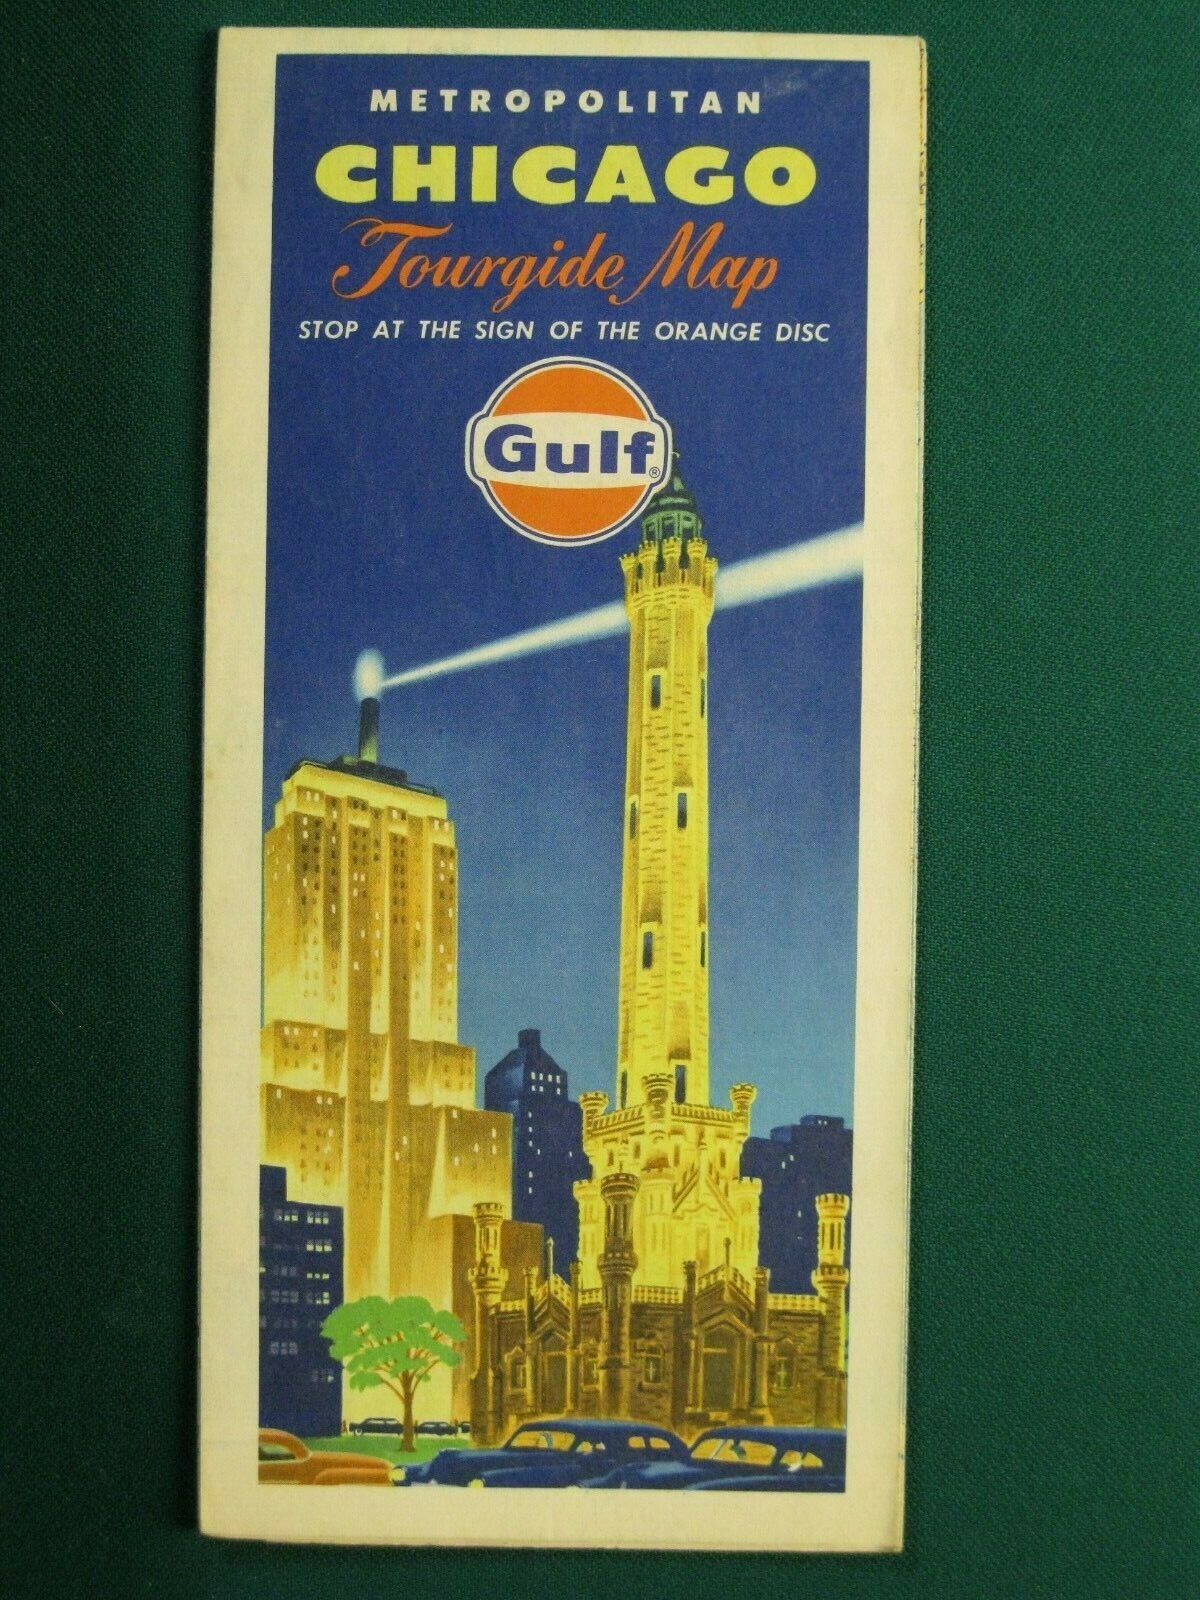 Gulf Oil 1974 Highway Road Map Of Chicago